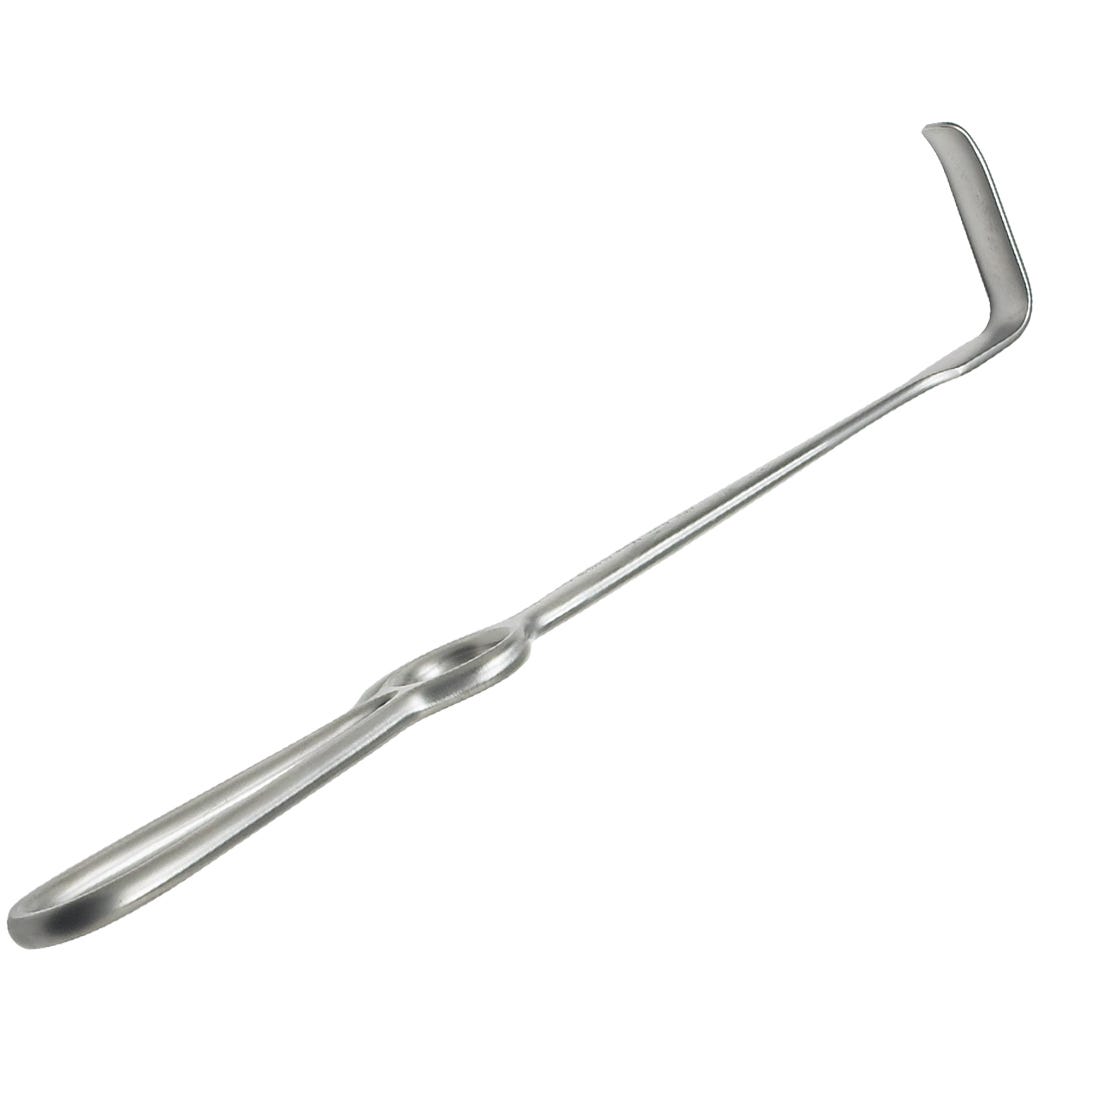 Obwegeser Type Surgical Retractor Concave, Curved Down, 10mm x 35mm